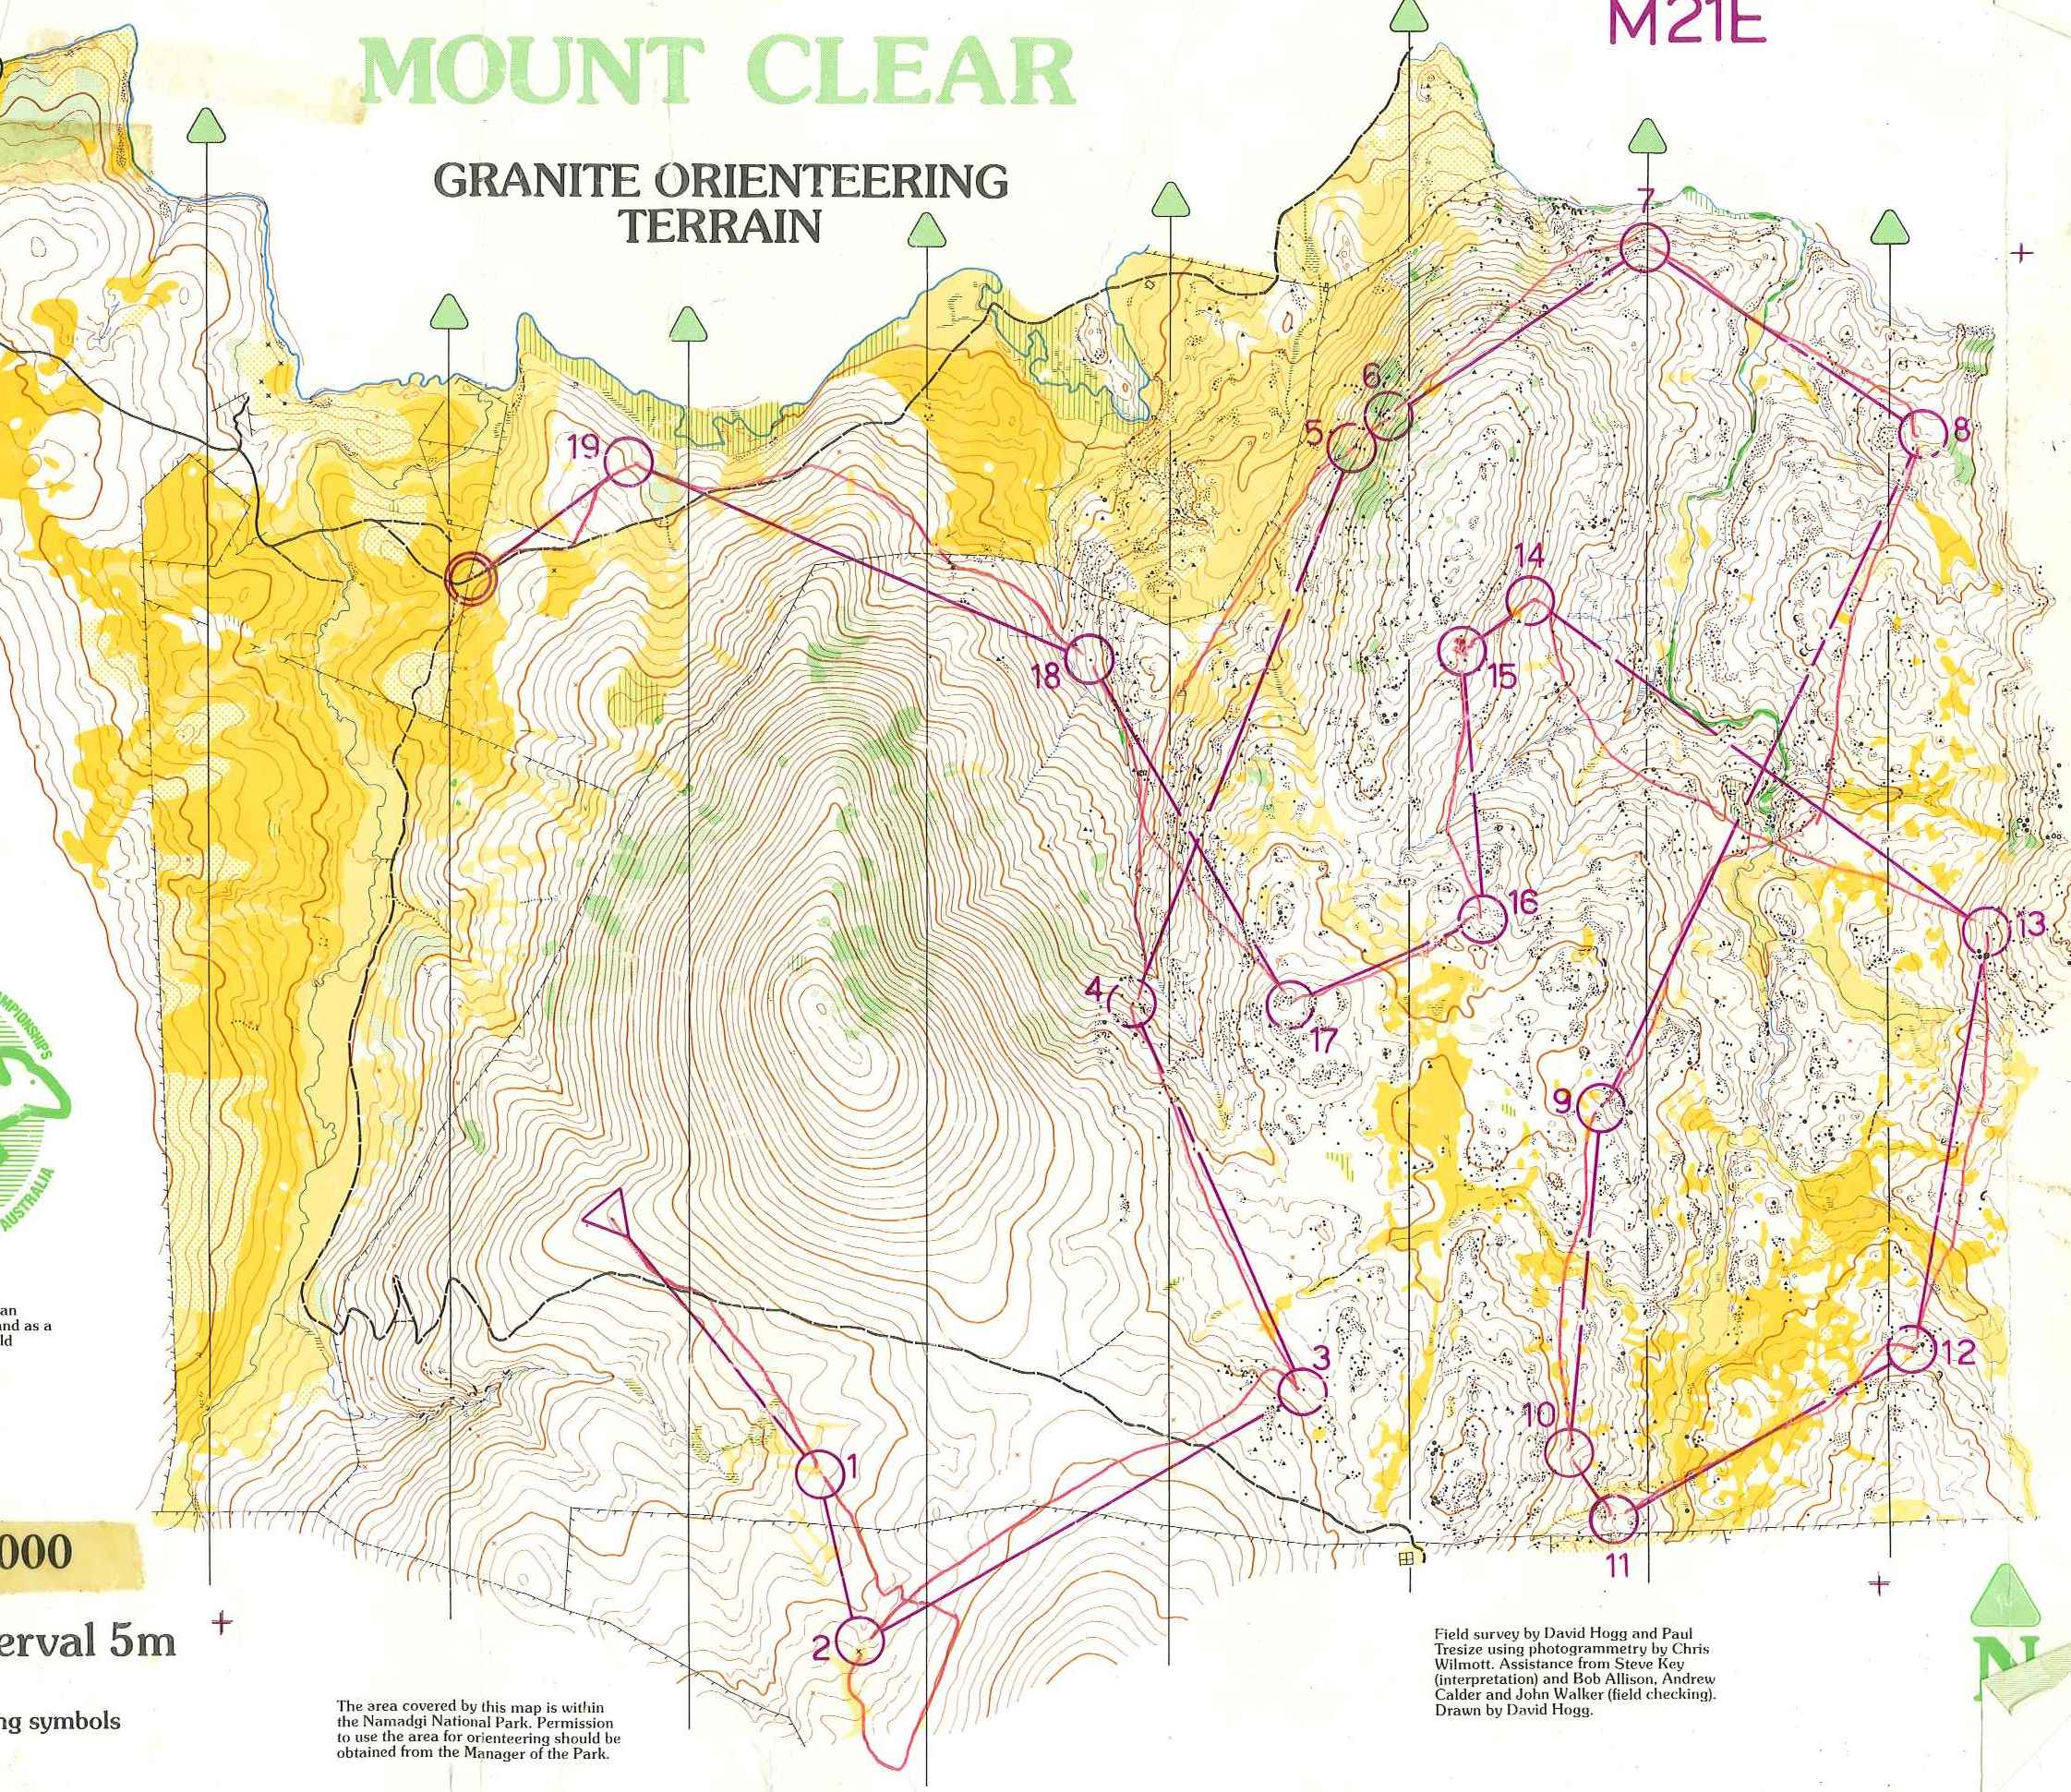 Mount Clear (31/03/1985)